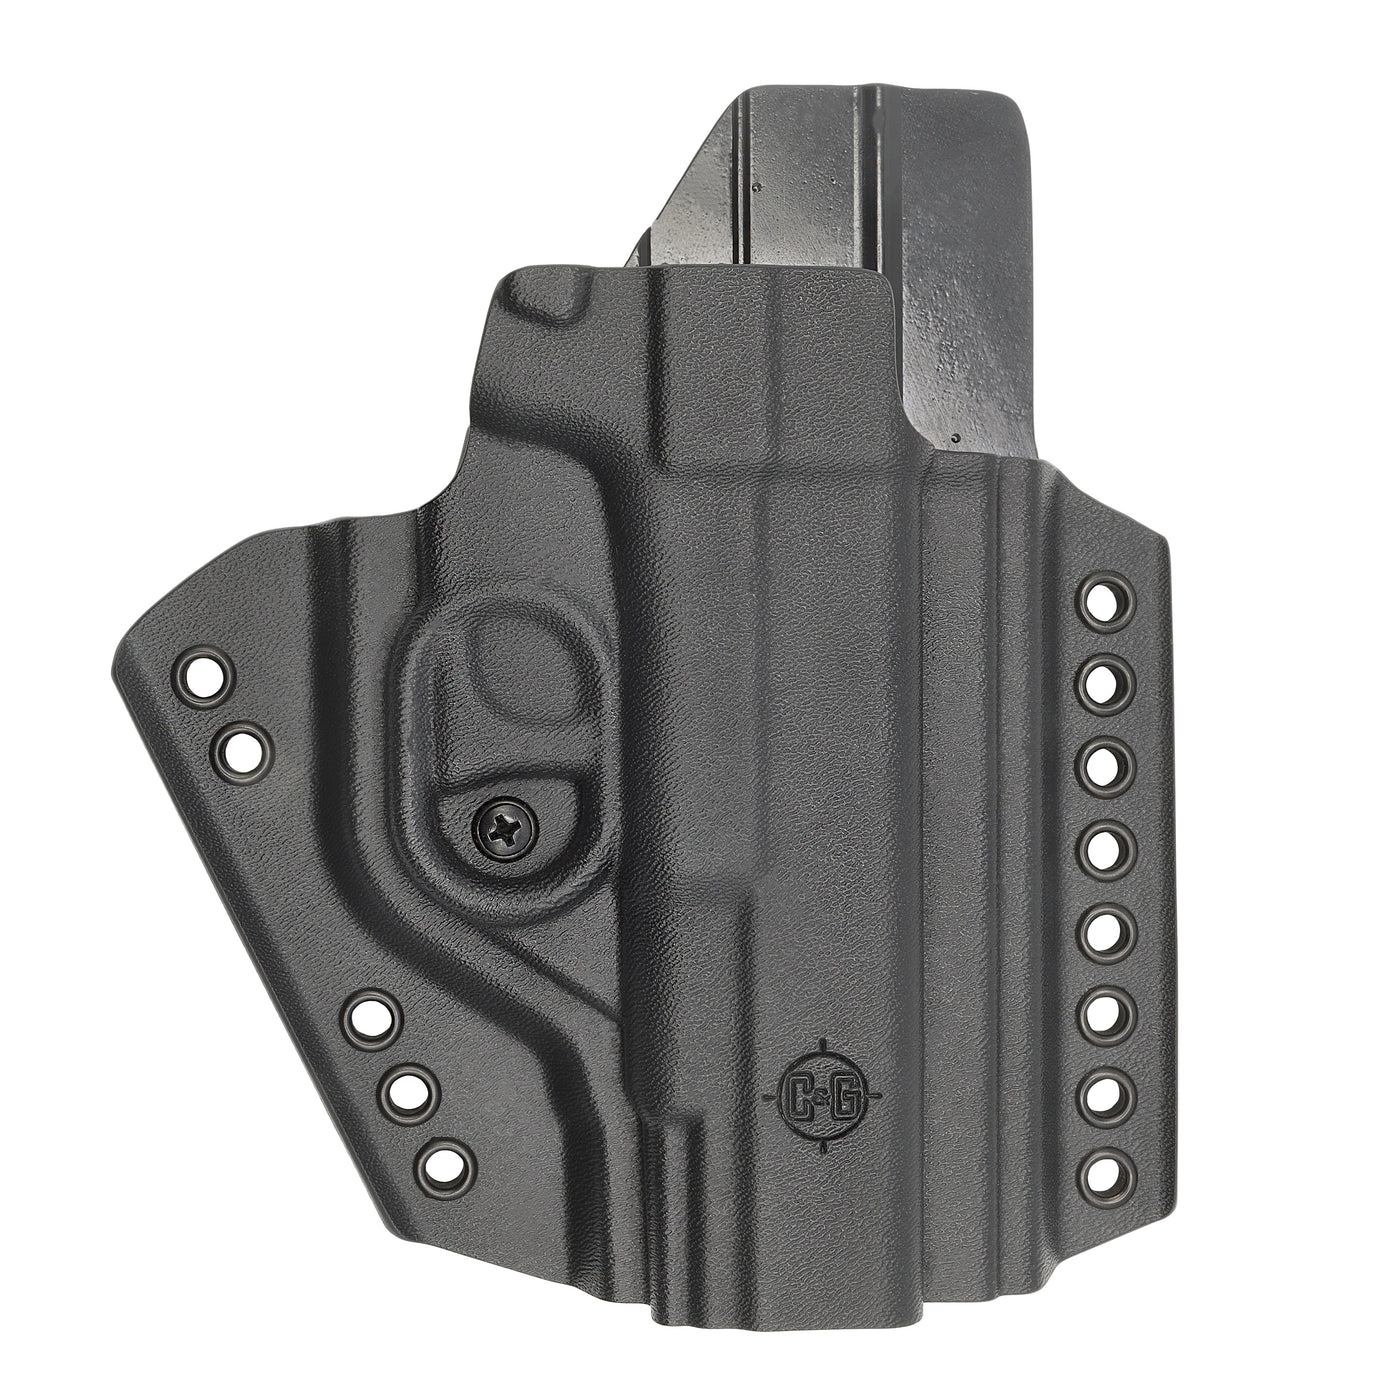 C&G Holsters quickship chest mounted system Glock 20/21